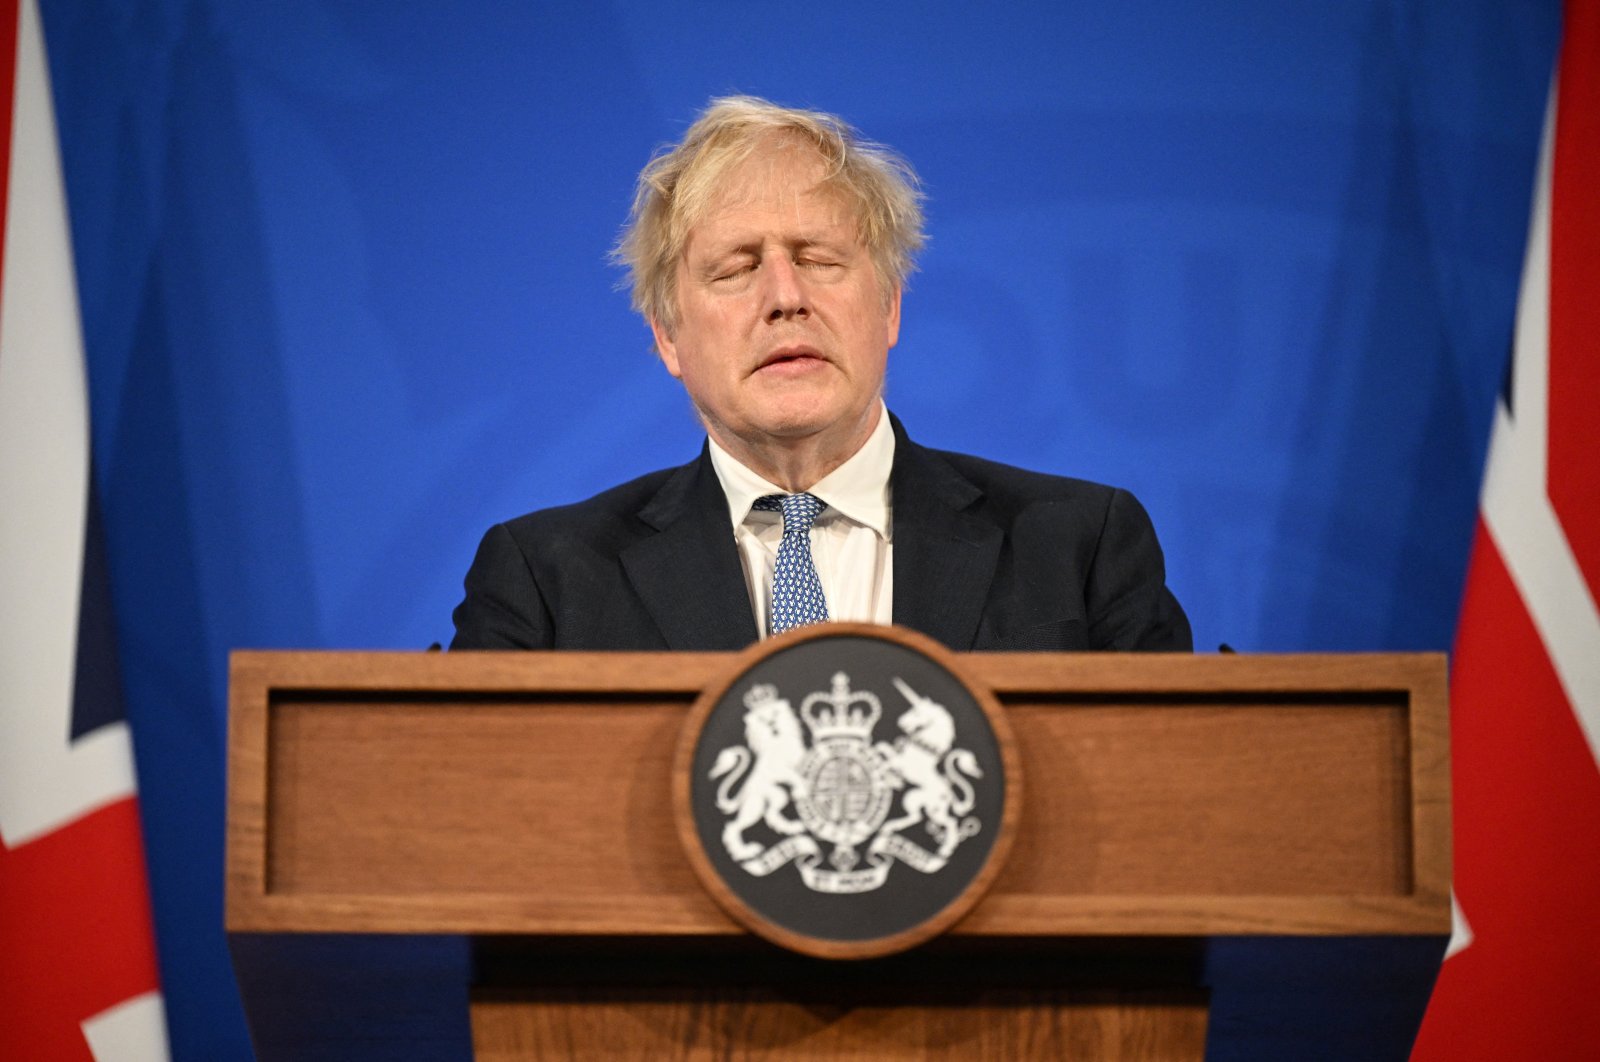 Britain&#039;s Prime Minister Boris Johnson holds a news conference in response to the publication of the Sue Gray report on "partygate" at Downing Street in London, U.K., May 25, 2022. (Reuters Photo)